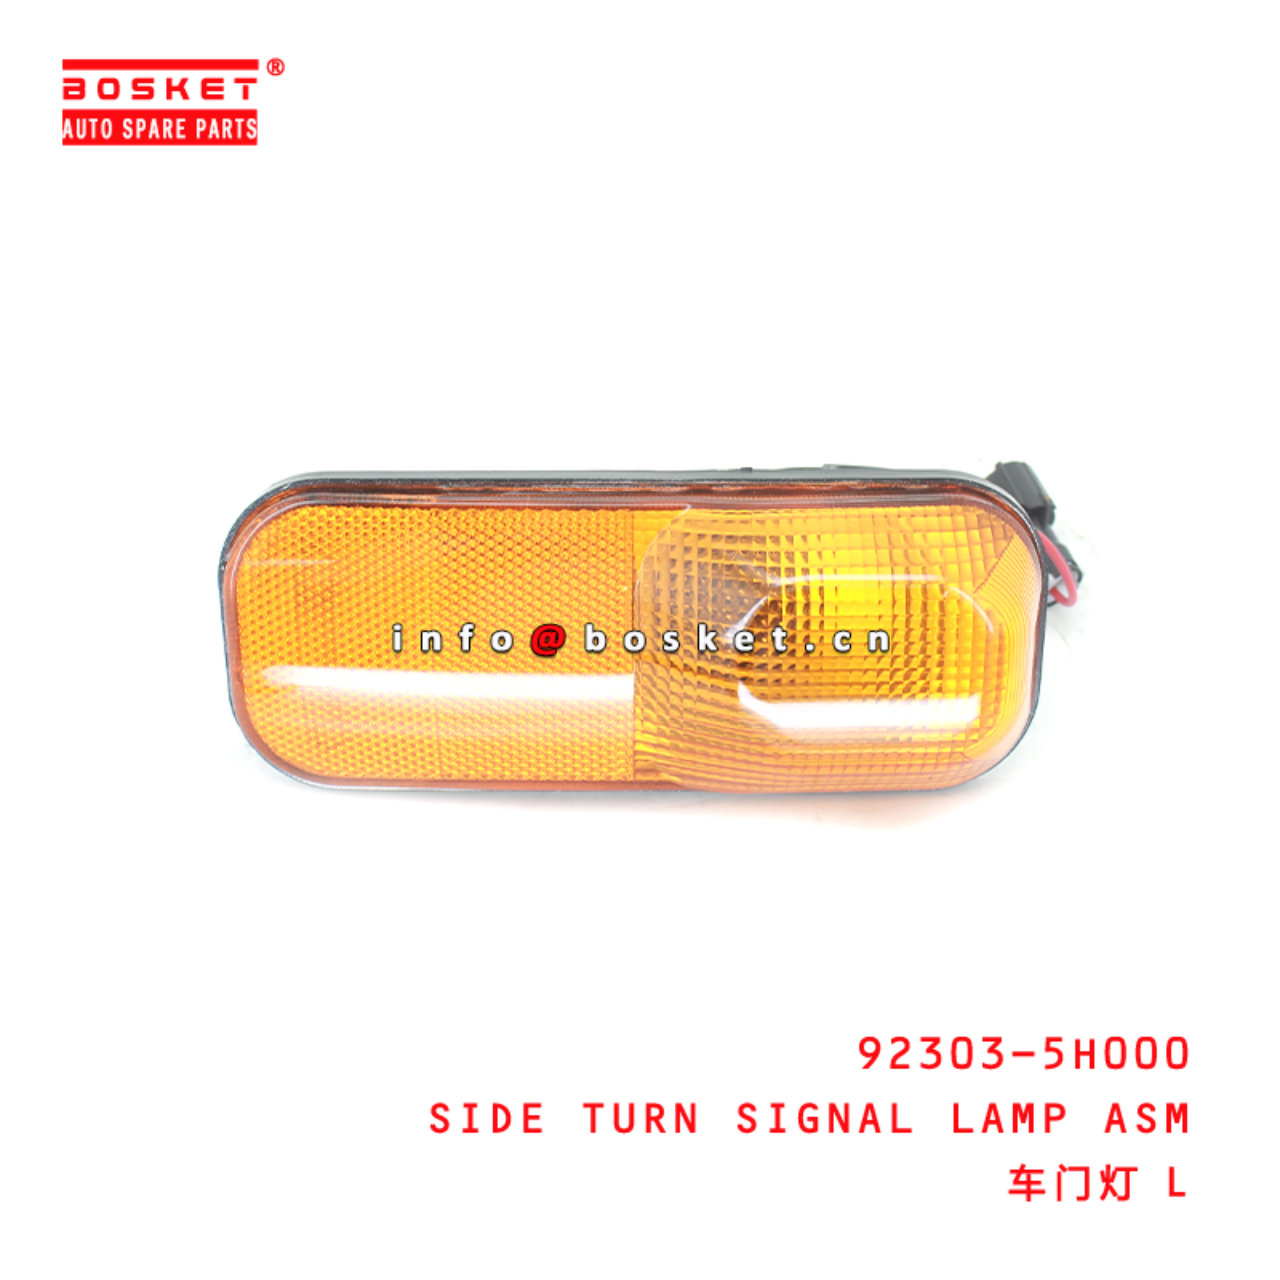 92303-5H000 Side Turn Signal Lamp Asm Suitable for ISUZU 现代HD72